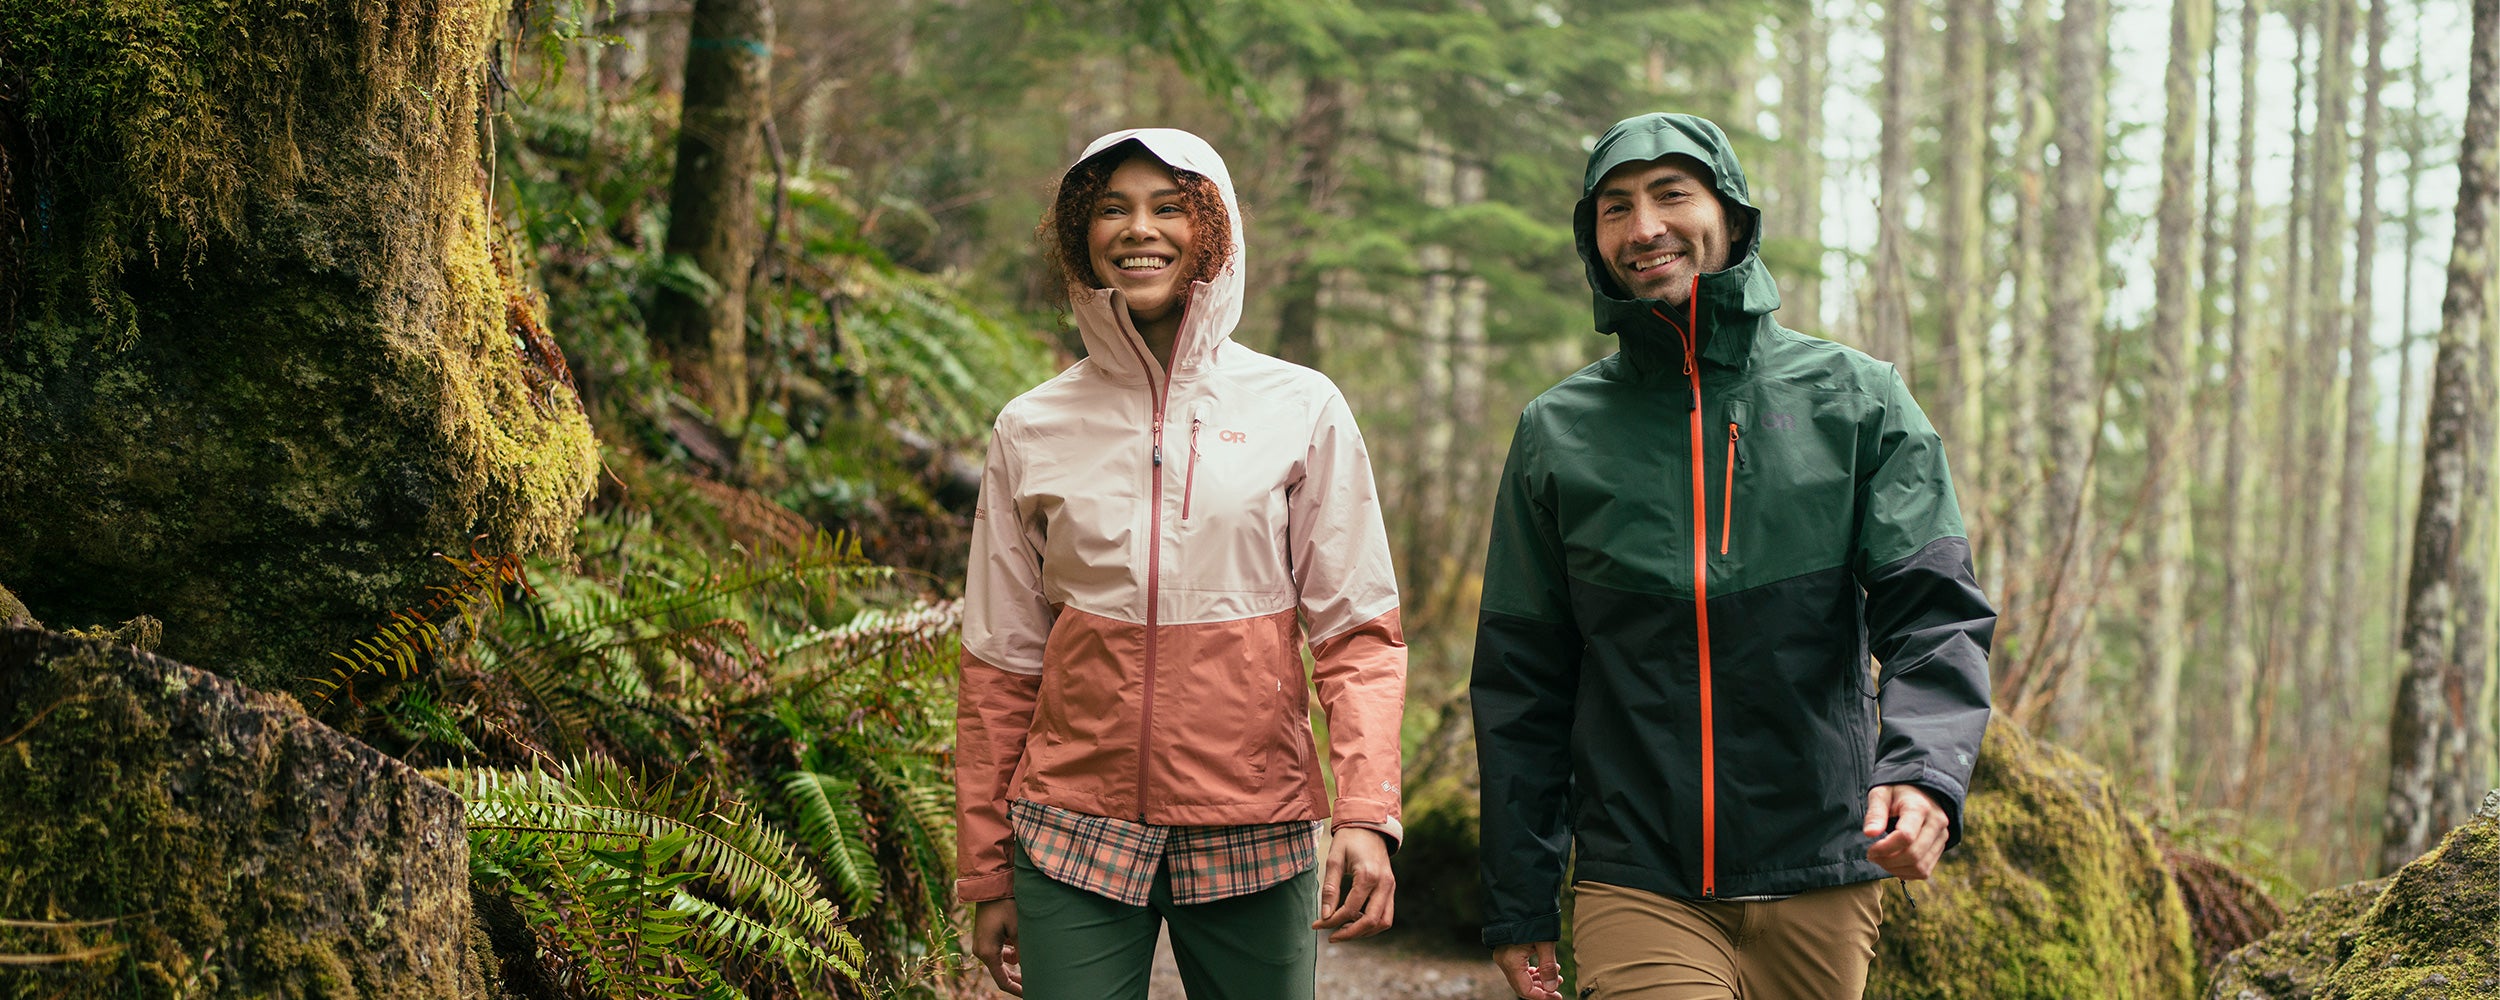 Gore-Tex Fabric: Why You Should Consider It For Your Next Outdoor Activity